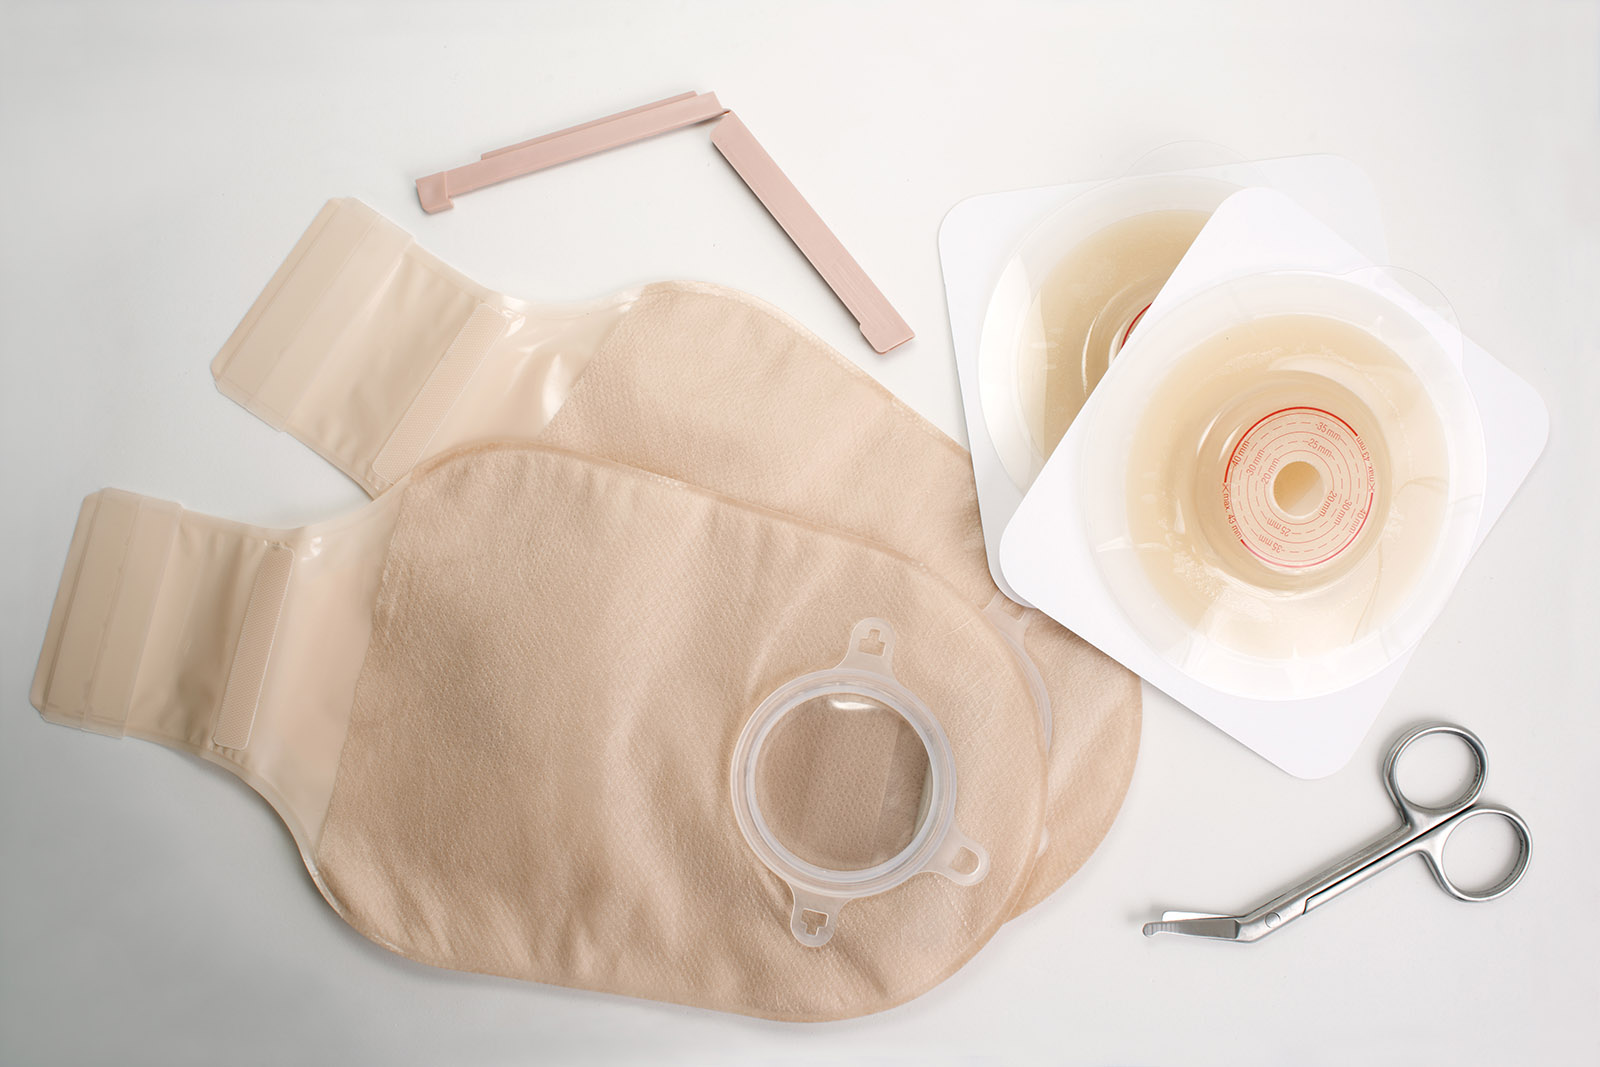 Colostomy Bag Covers with Round Opening - 2 Pack : Amazon.in: Home & Kitchen